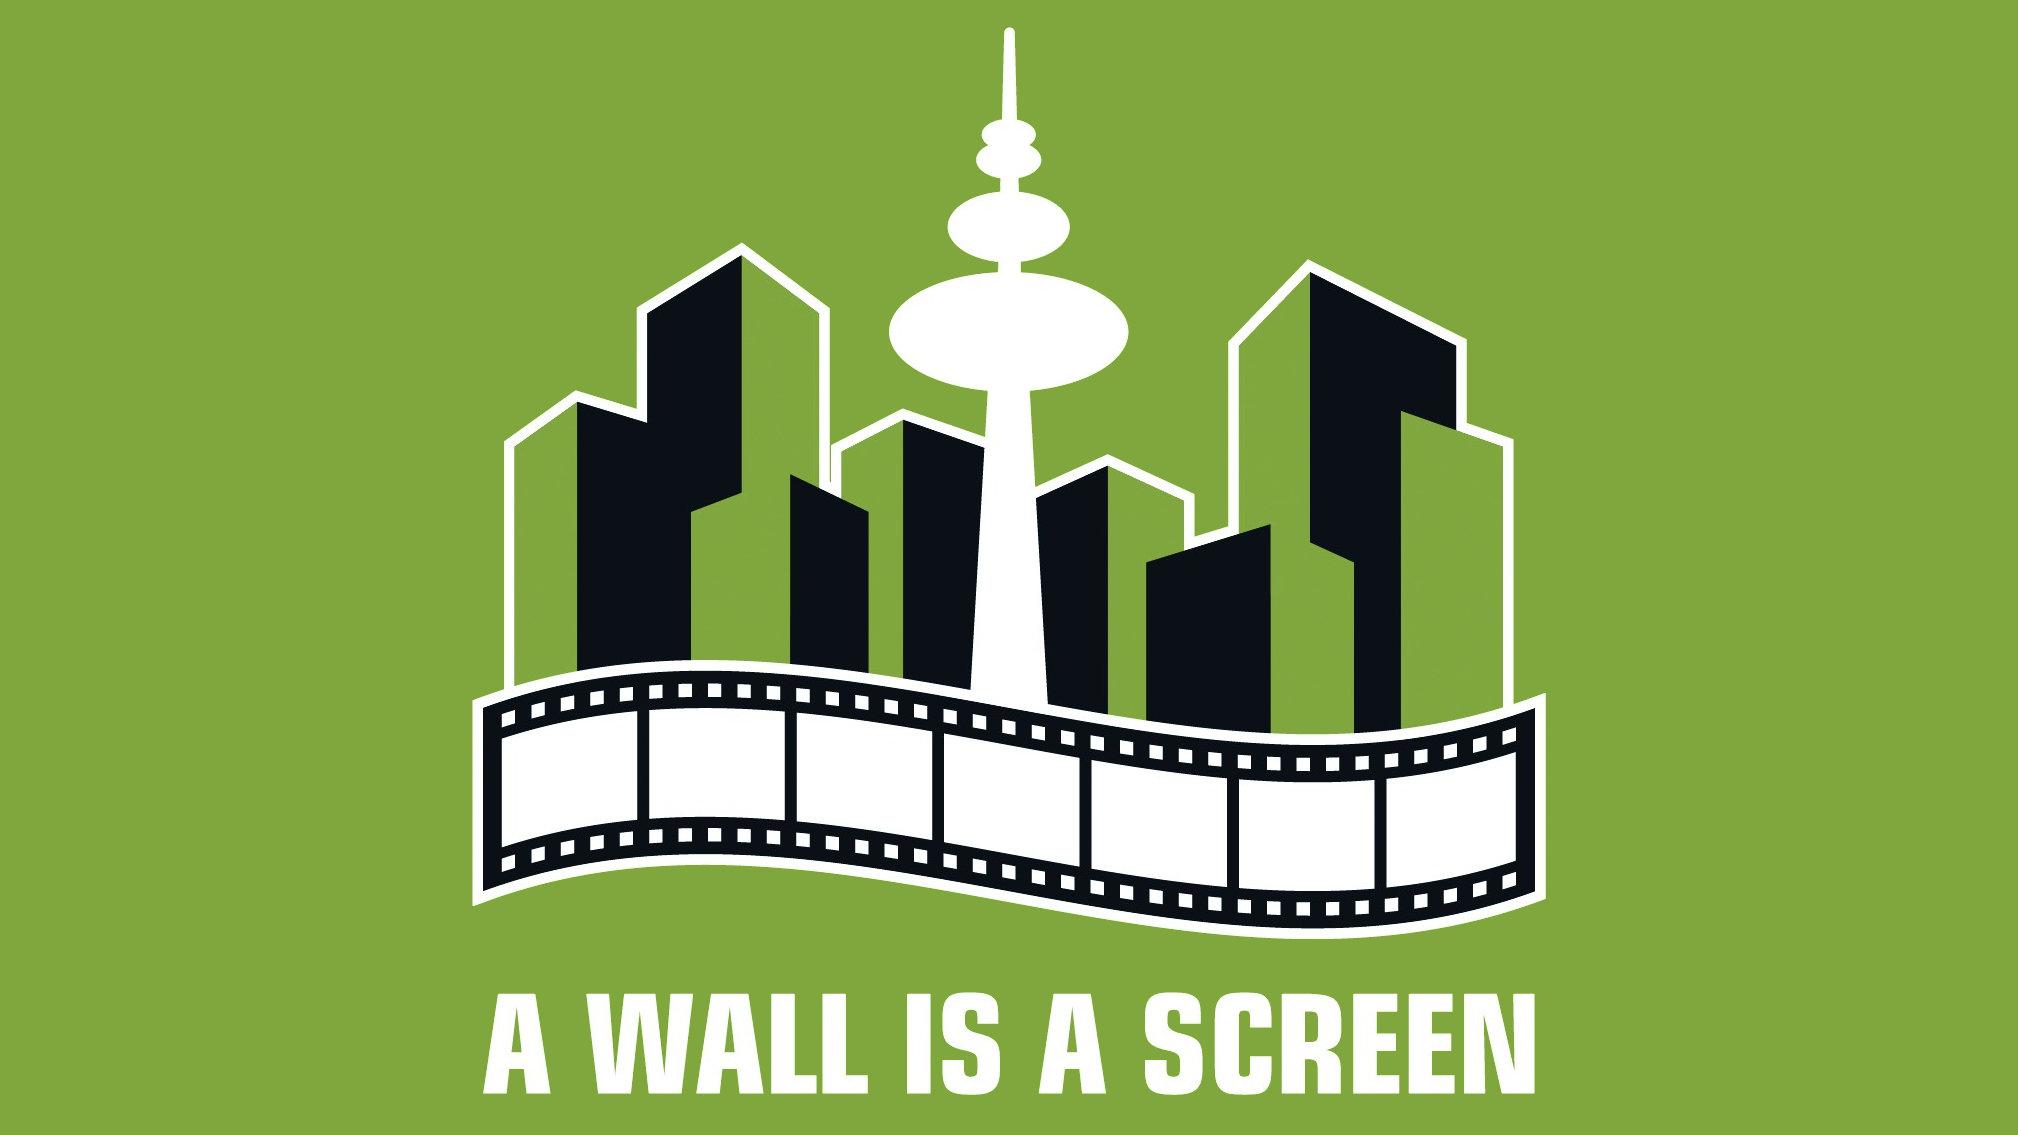 A wall is a screen